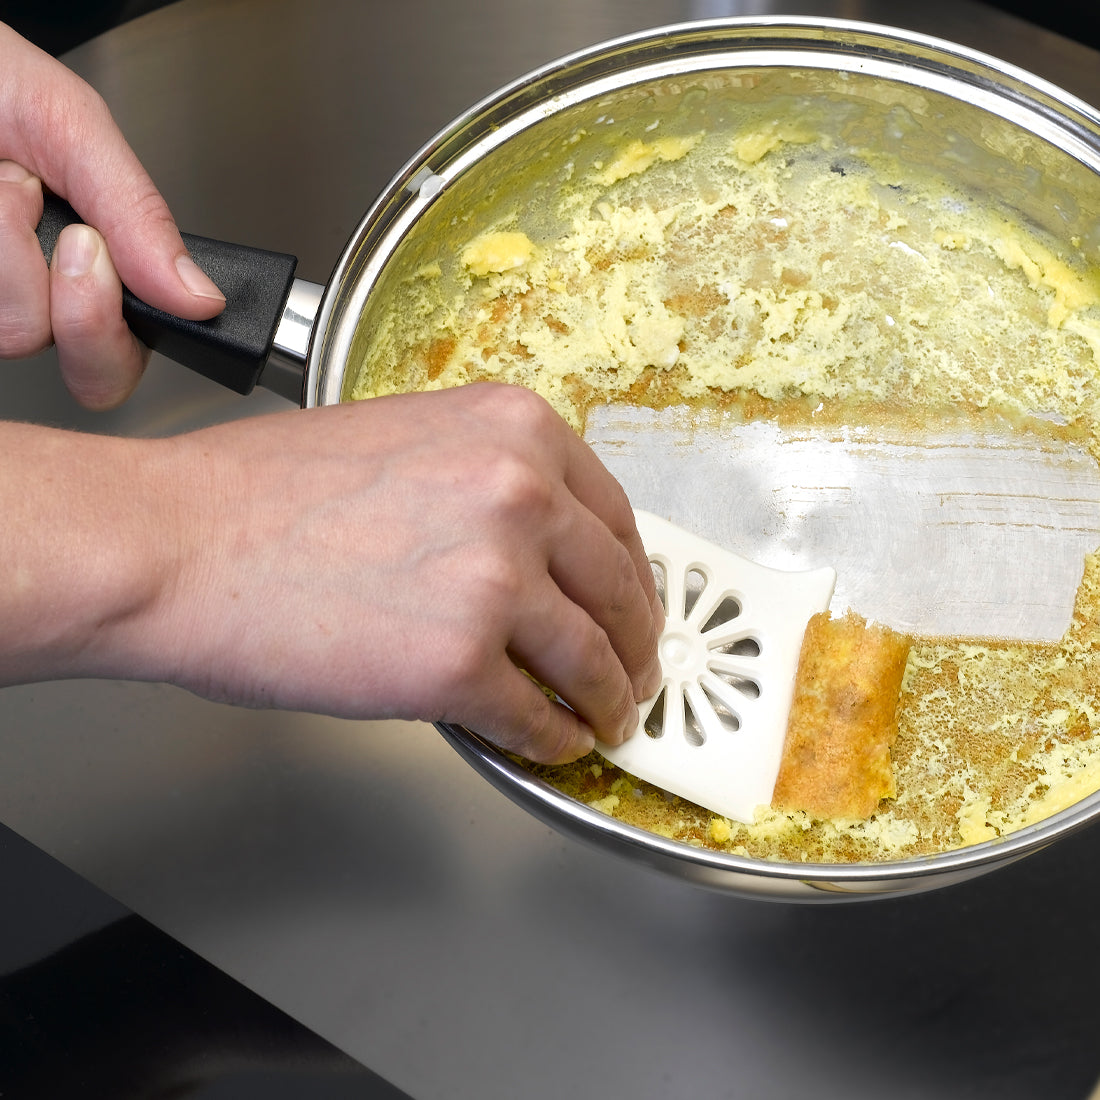 A Daisy PanMate Scraper being used to scrape egg from the bottom of a pan